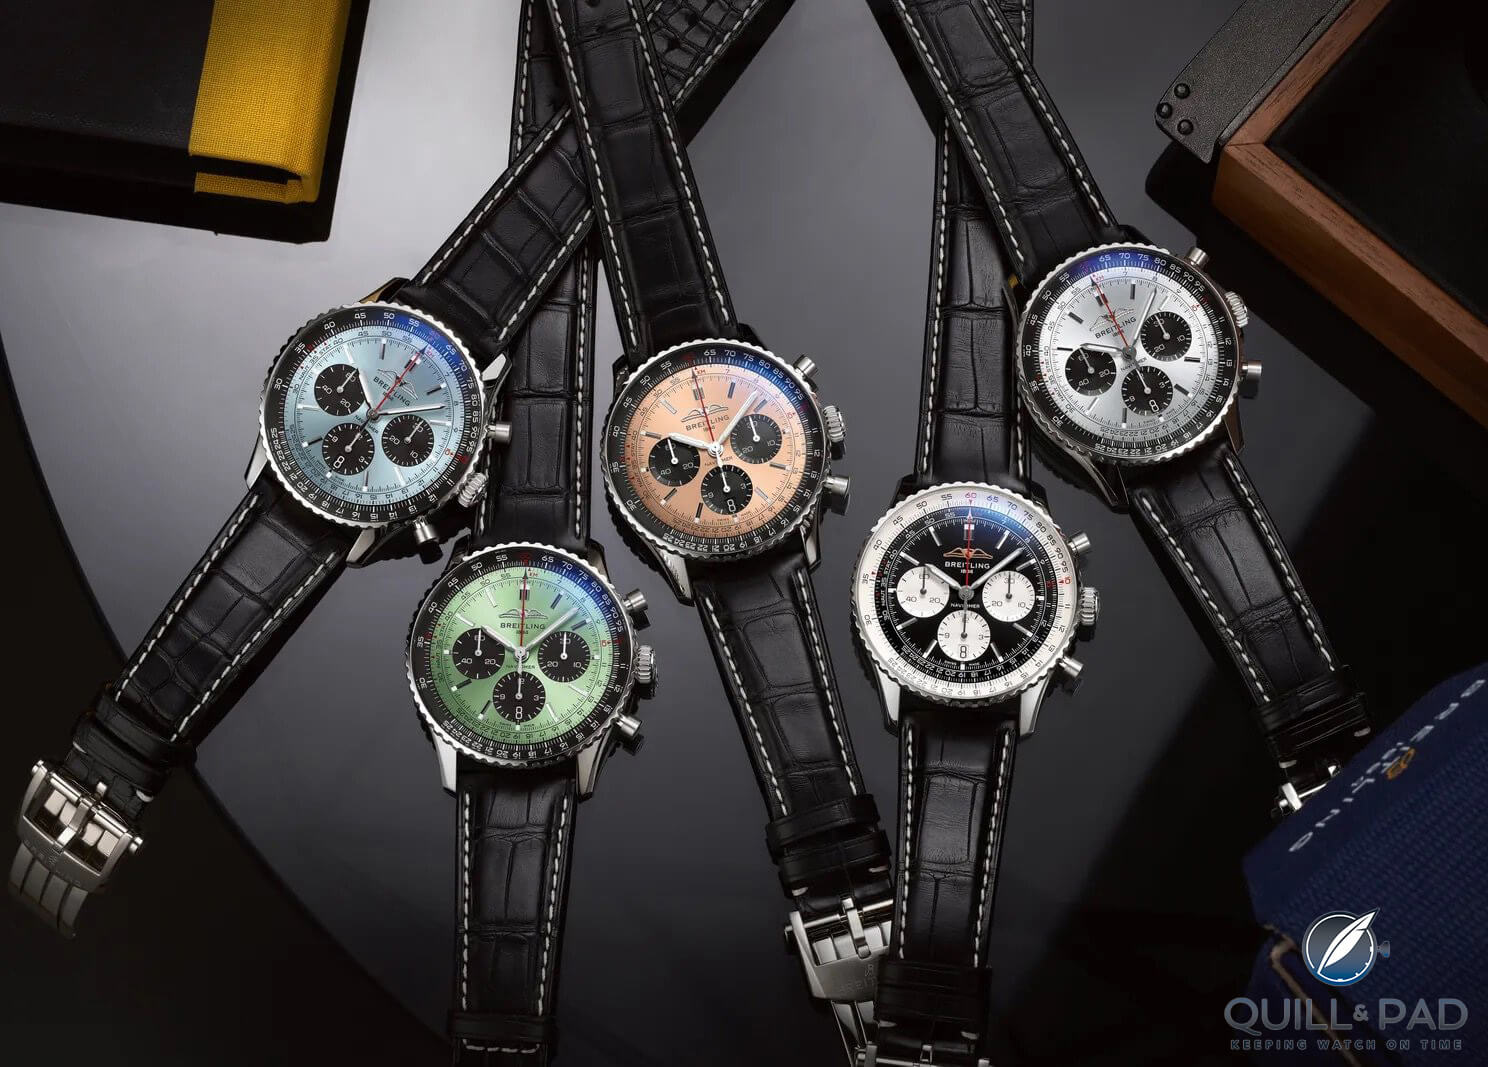 Louis Vuitton hits reset on its watches. What's next?